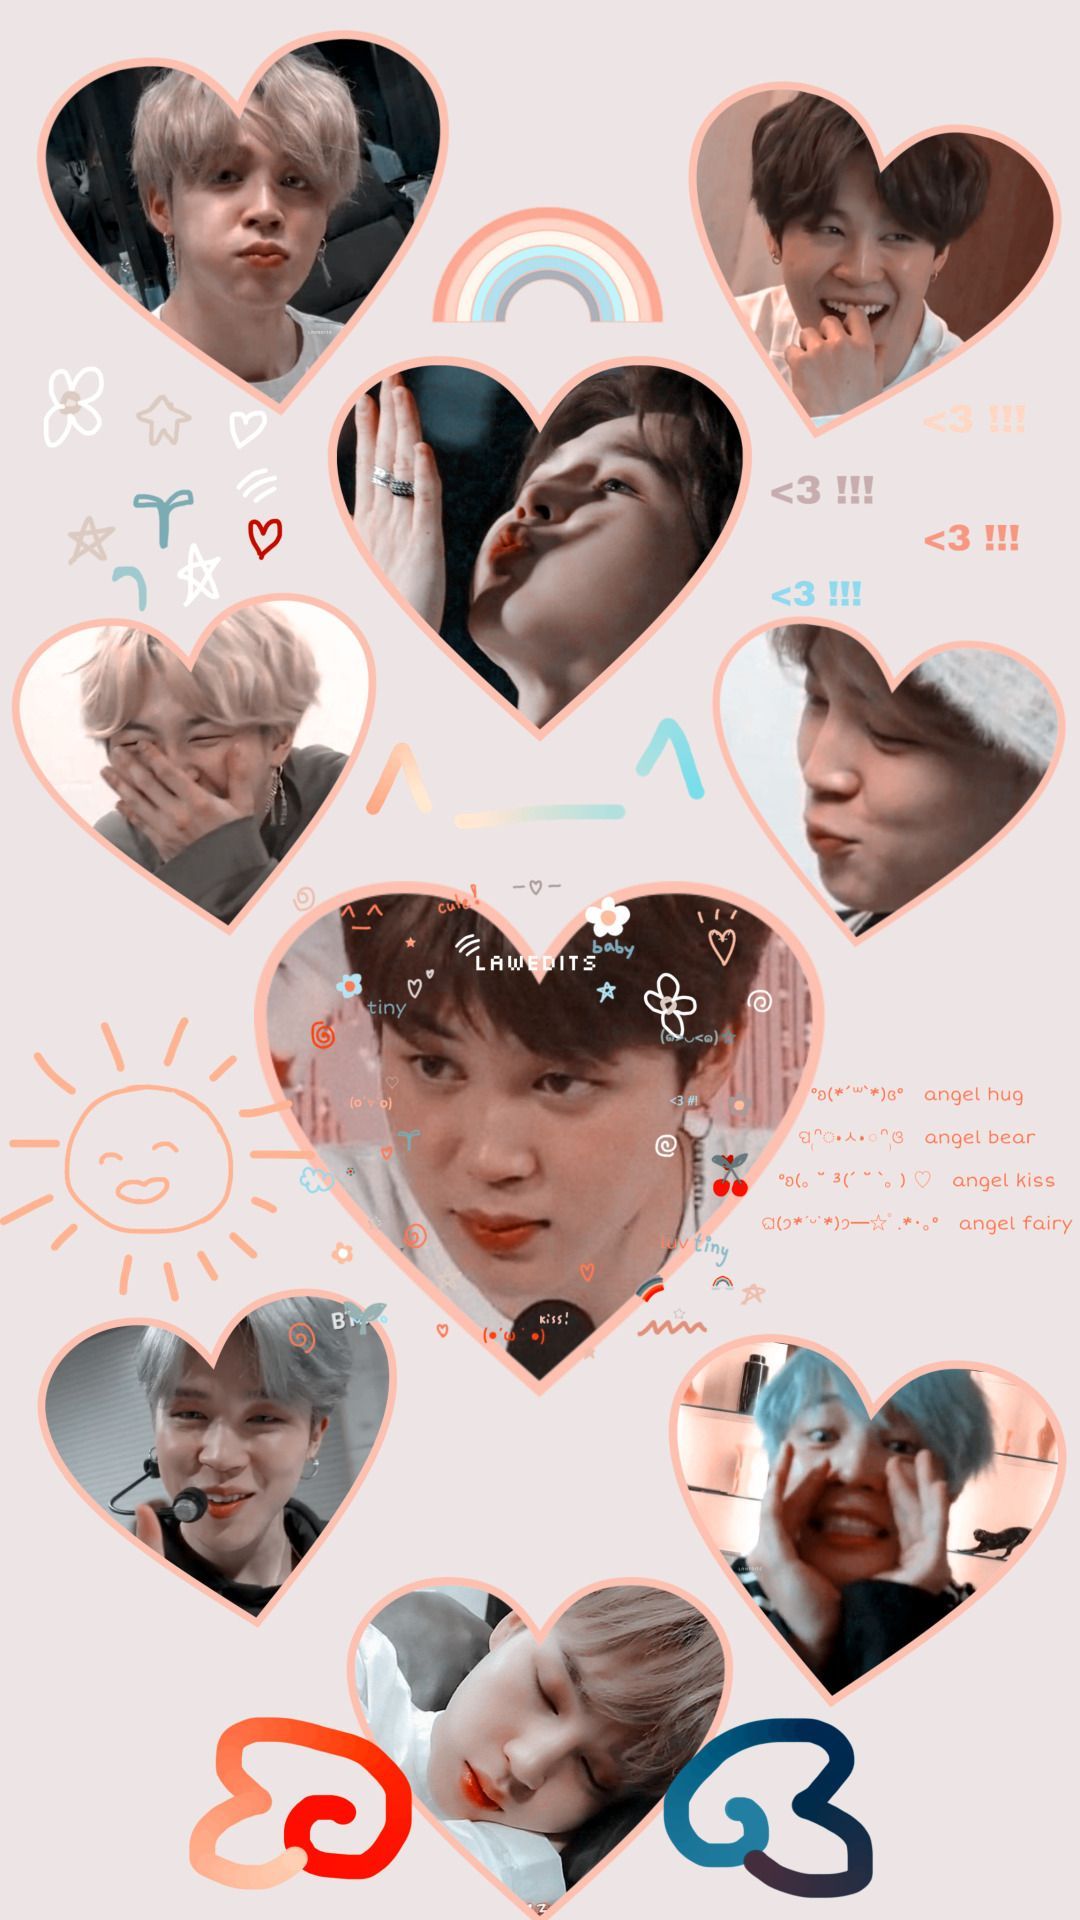 Aesthetic BTS wallpaper with different pictures of the members of BTS in the shape of hearts - Jimin